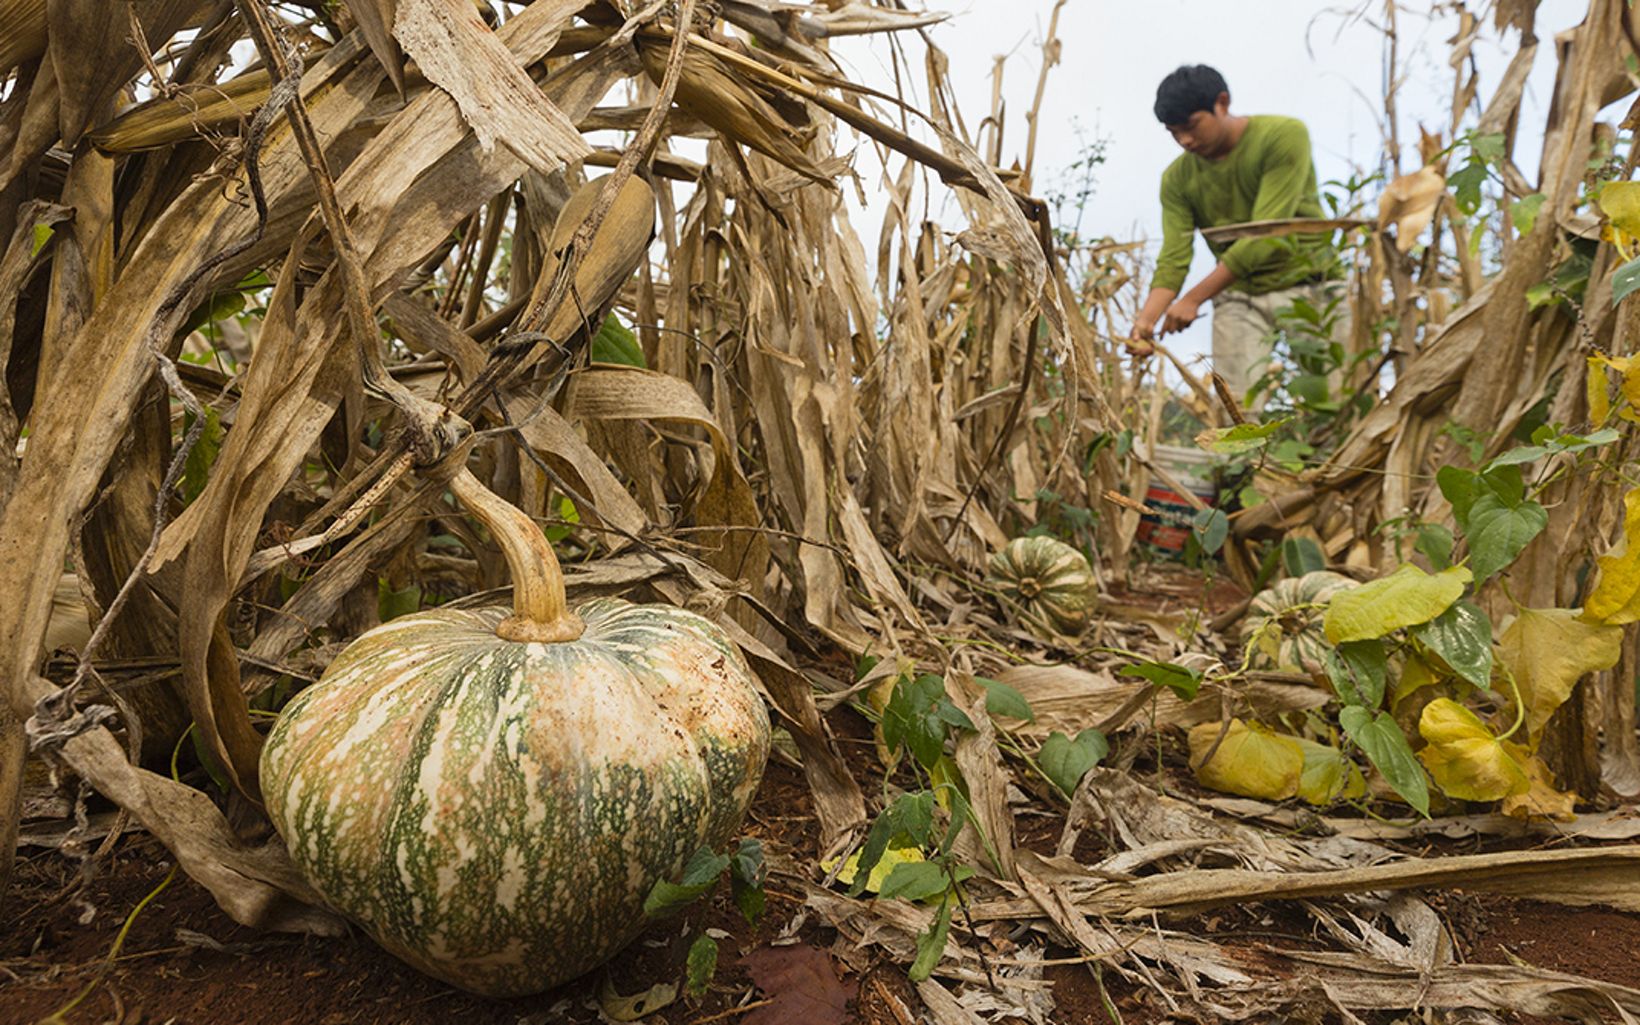 A farmer picks squash, beans and corn from his father’sfield in Mexico’s Yucatan Peninsula.